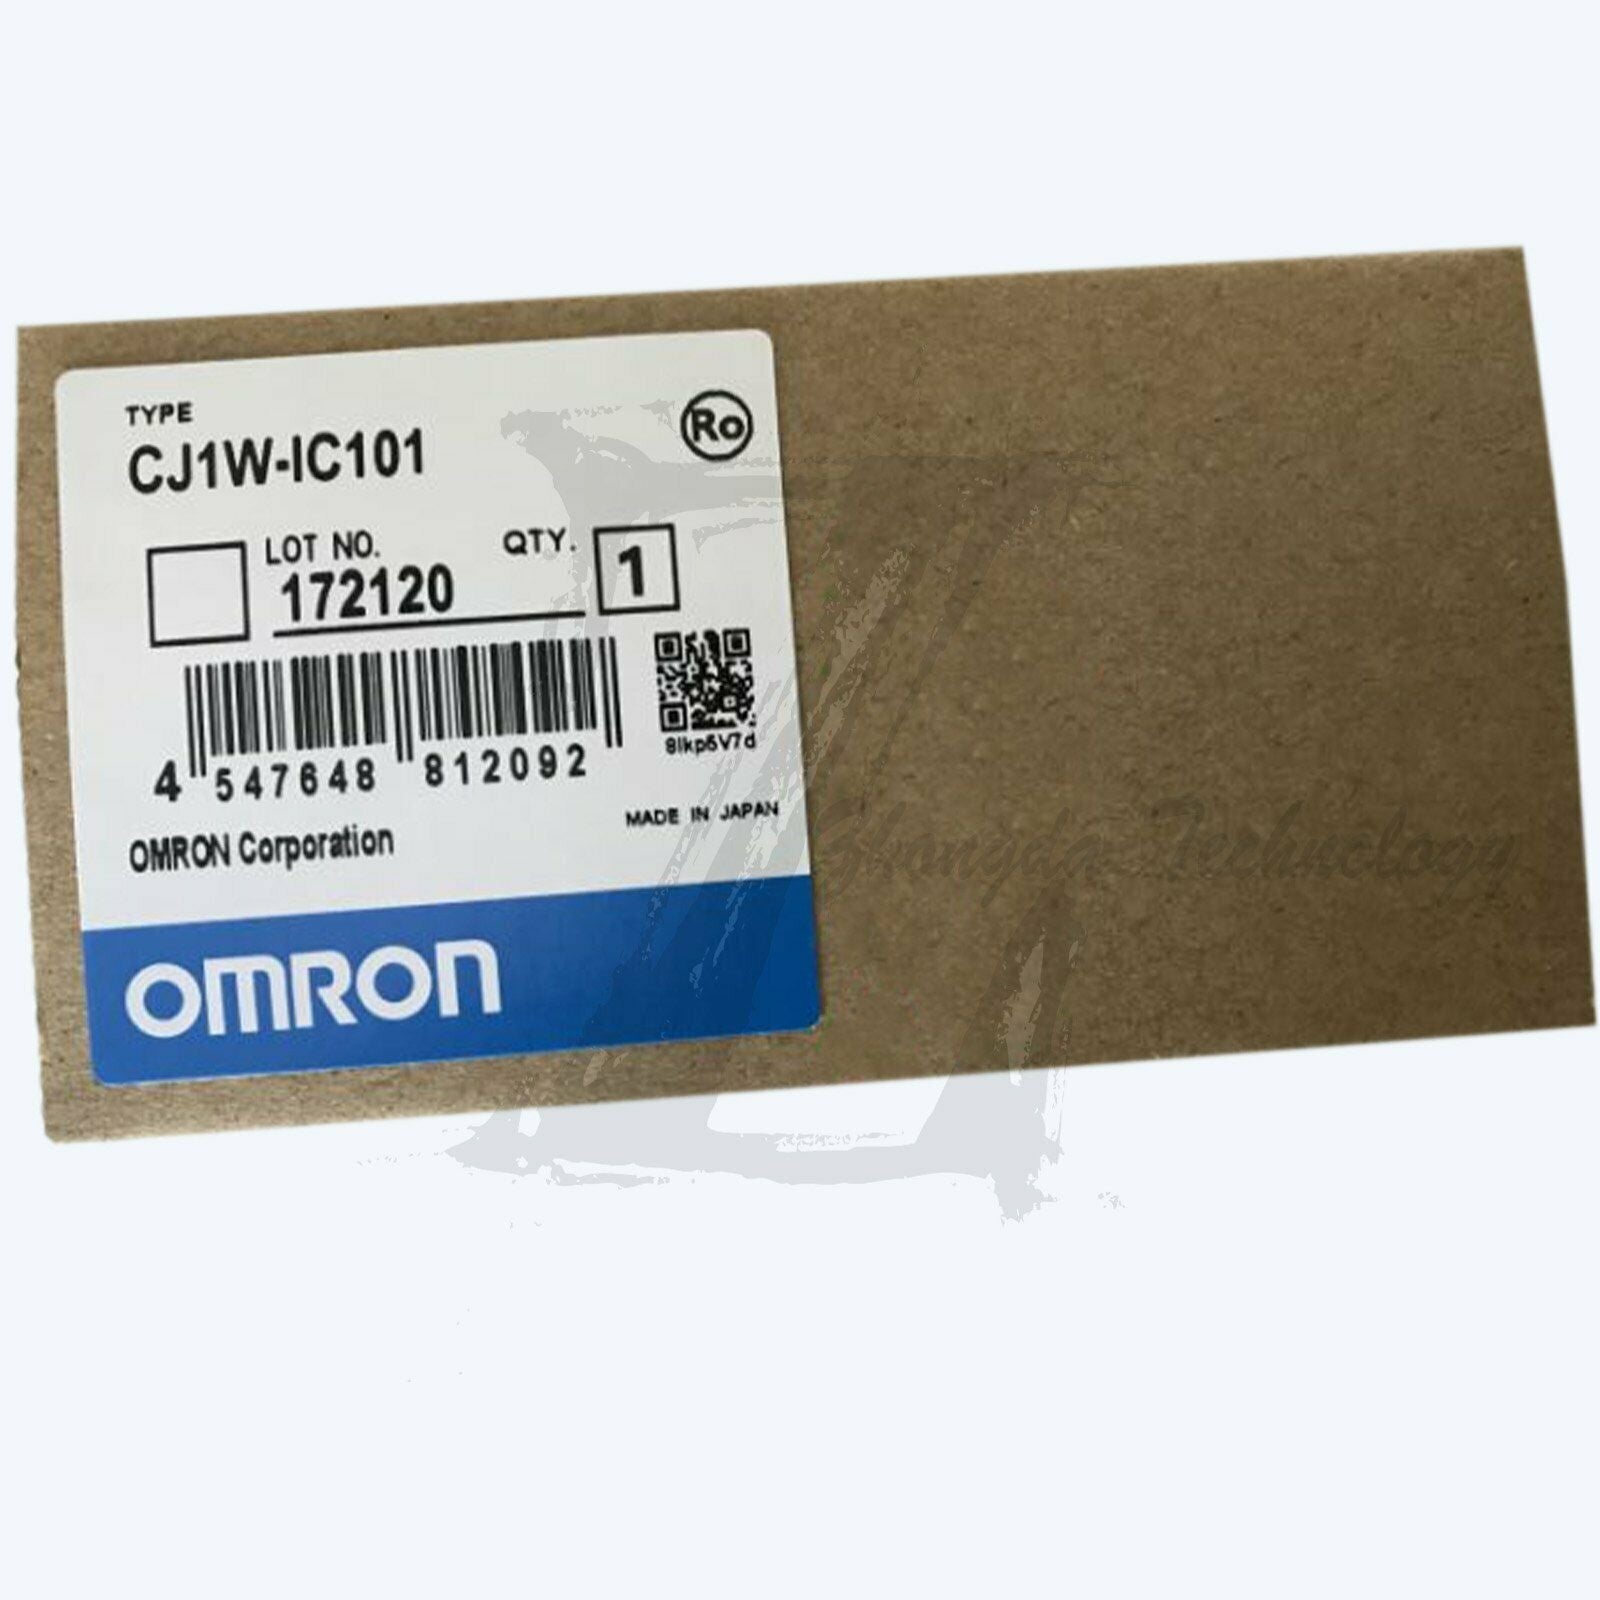 1pc new Omron CJ1W-IC101 module one year warranty KOEED 1, 80%, import_2020_10_10_031751, Omron, Other